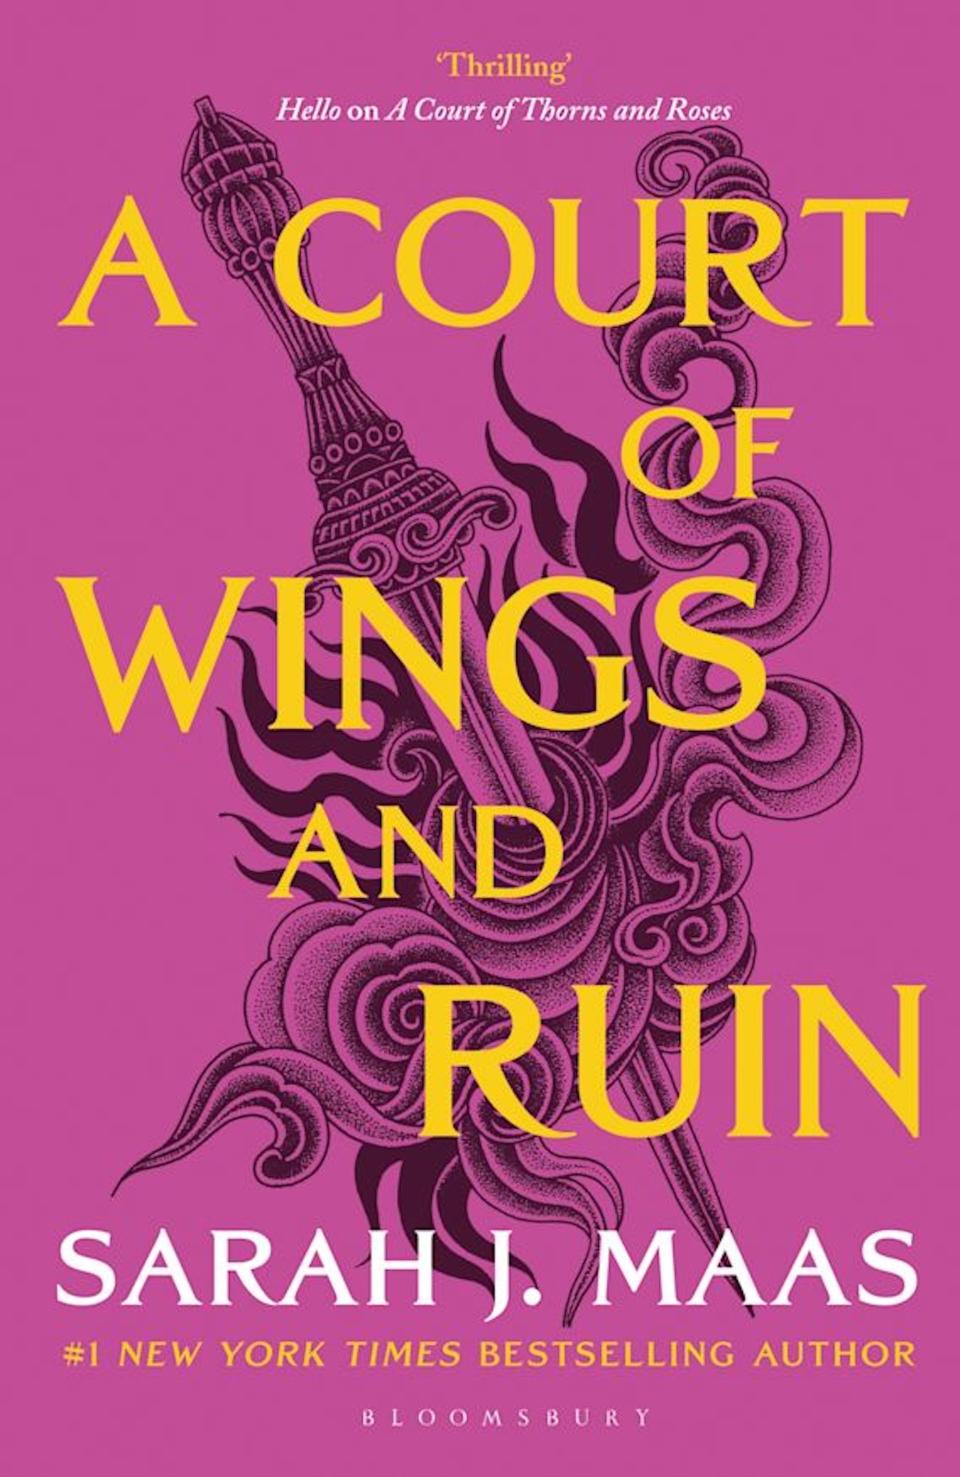 "A Court of Wings and Ruin" by Sarah J. Maas.